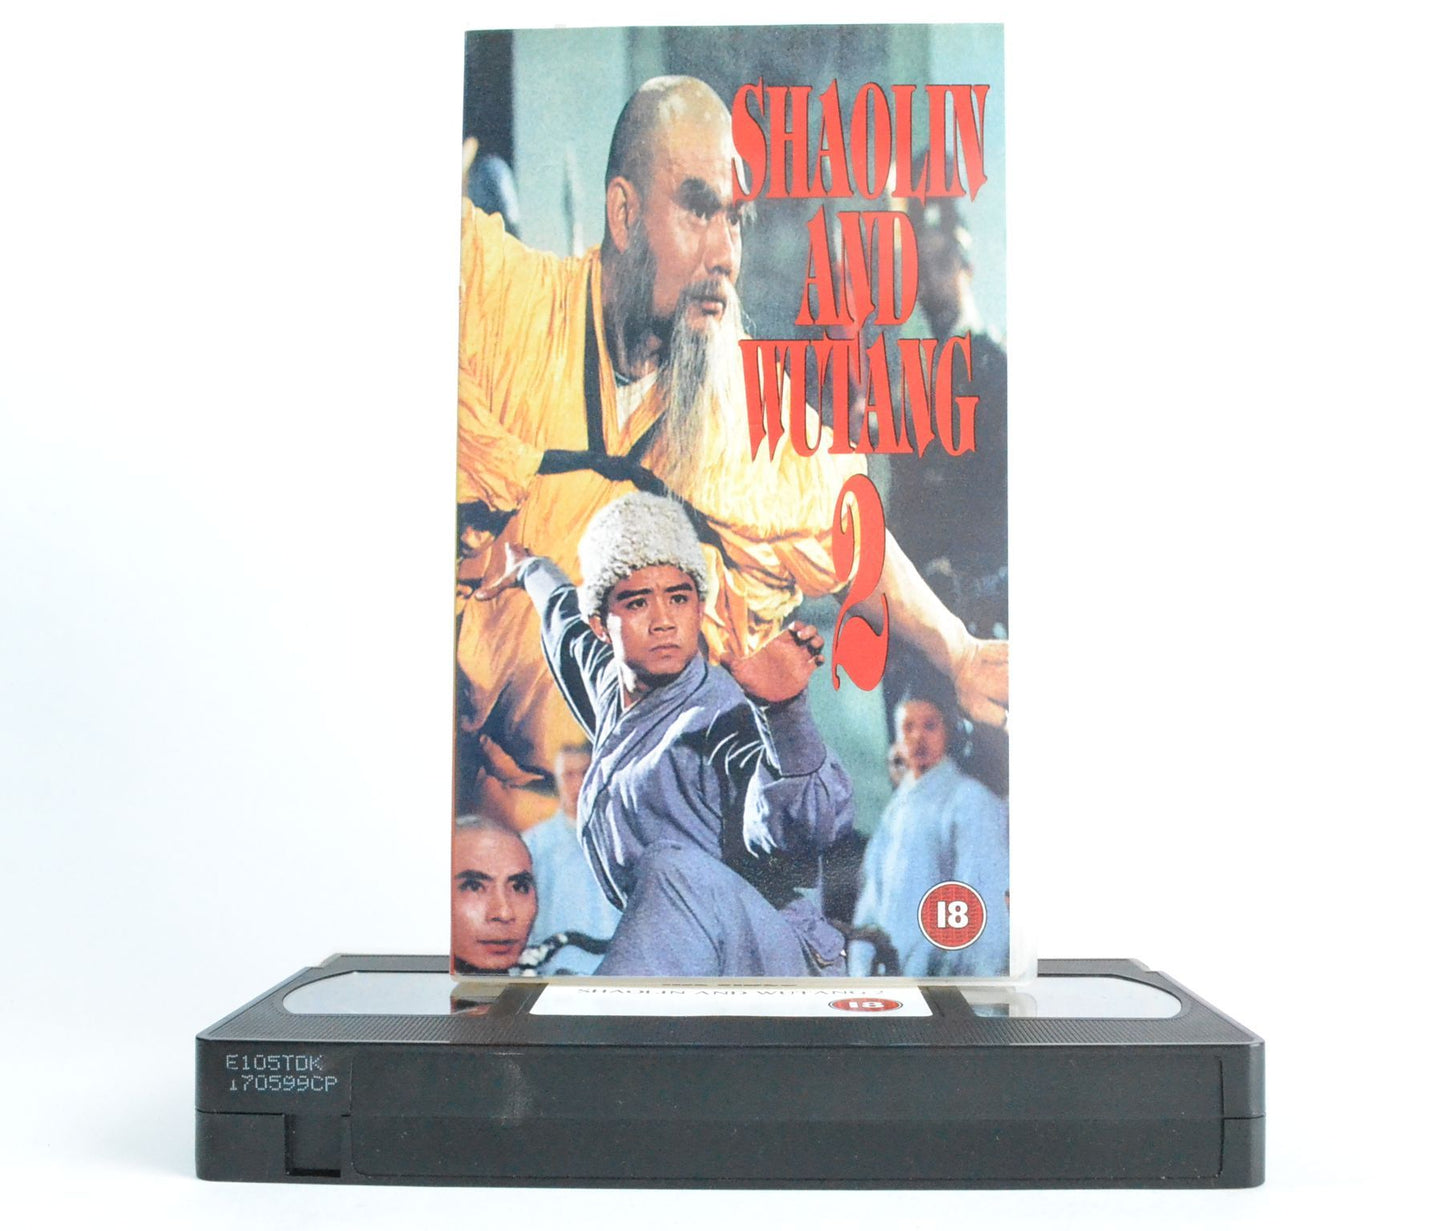 Shaolin And Wutang 2: HJL Video - Yu Rong Kwong- Donnie Lee - Kung-Fu - VHS-